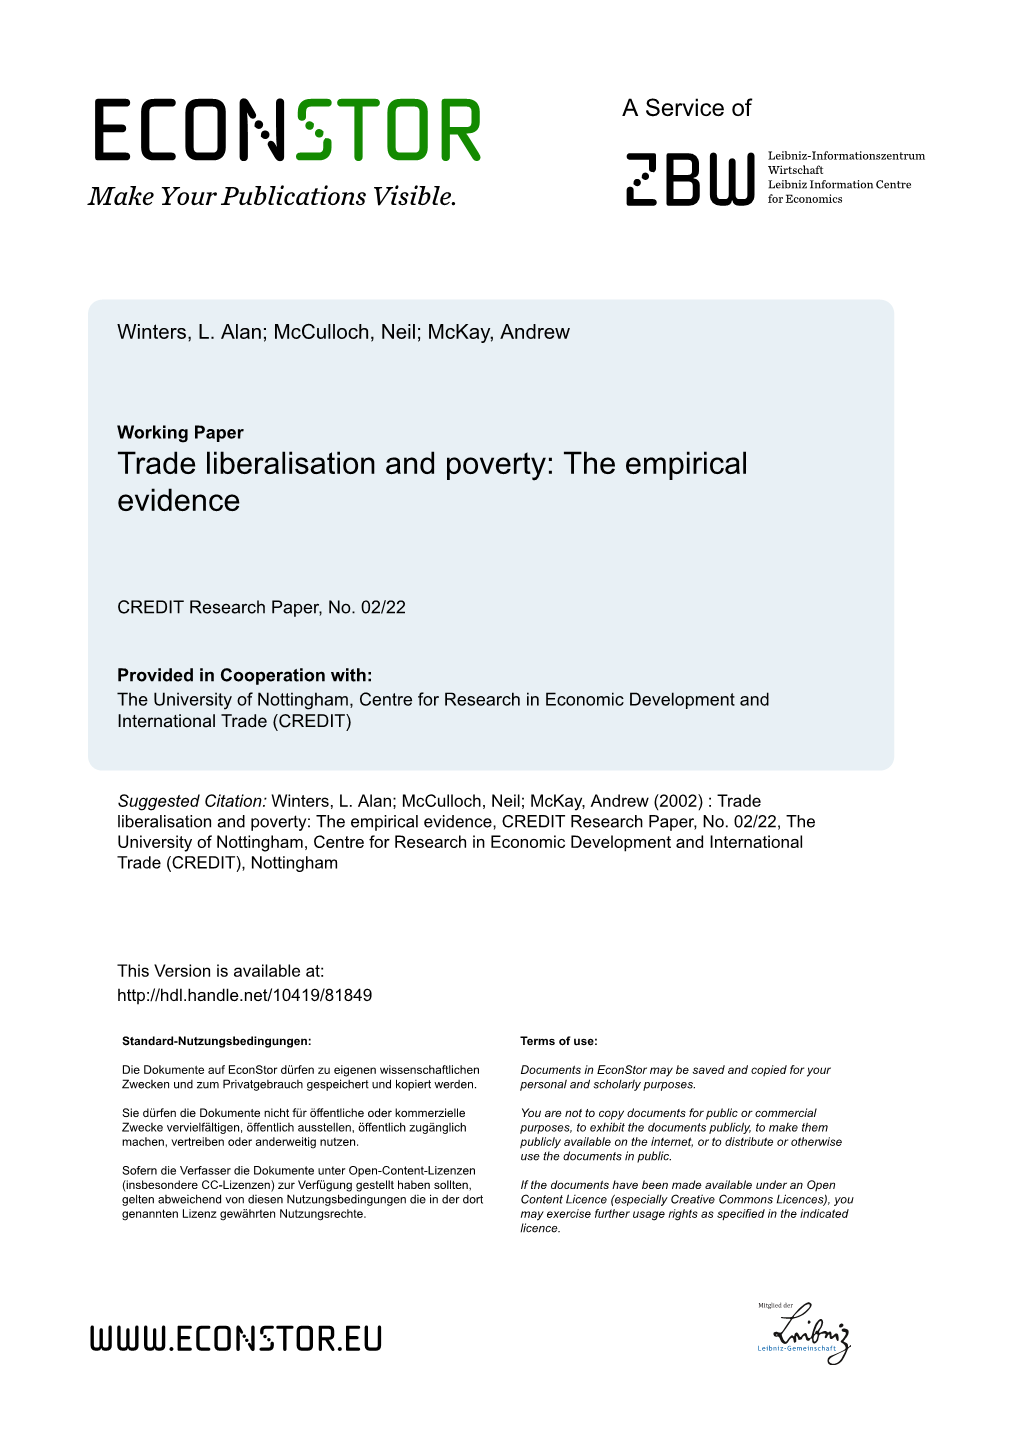 Trade Liberalisation and Poverty: the Empirical Evidence